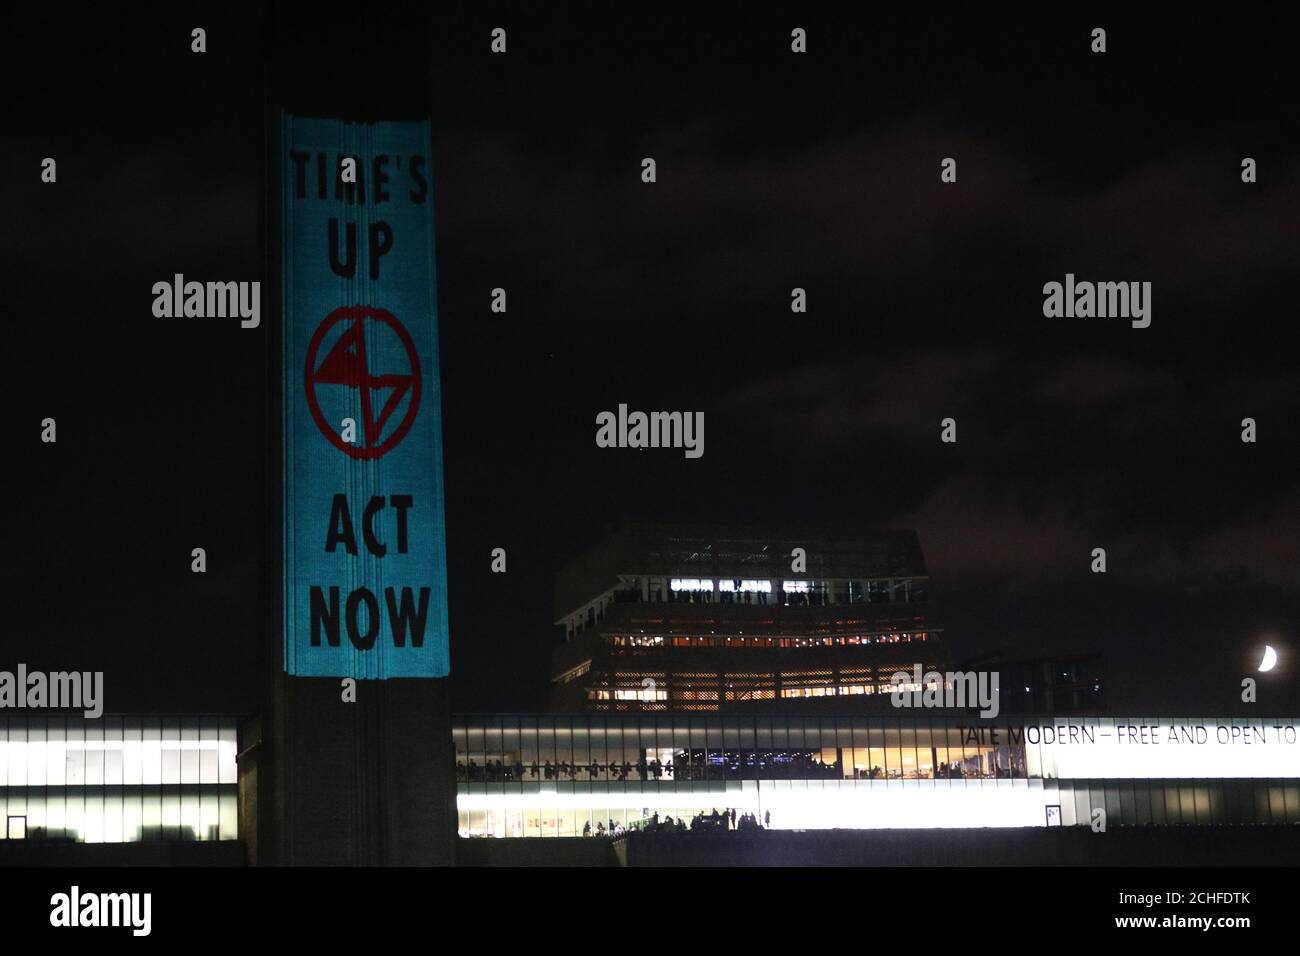 Extinction Rebellion activists walk around the Tate Modern as others project messages onto the building in London. The group announced this week that they will take to the streets in the next fortnight, planning to shut down roads around Westminster and staging a sit-in at City Airport in London as part of their protests. Stock Photo